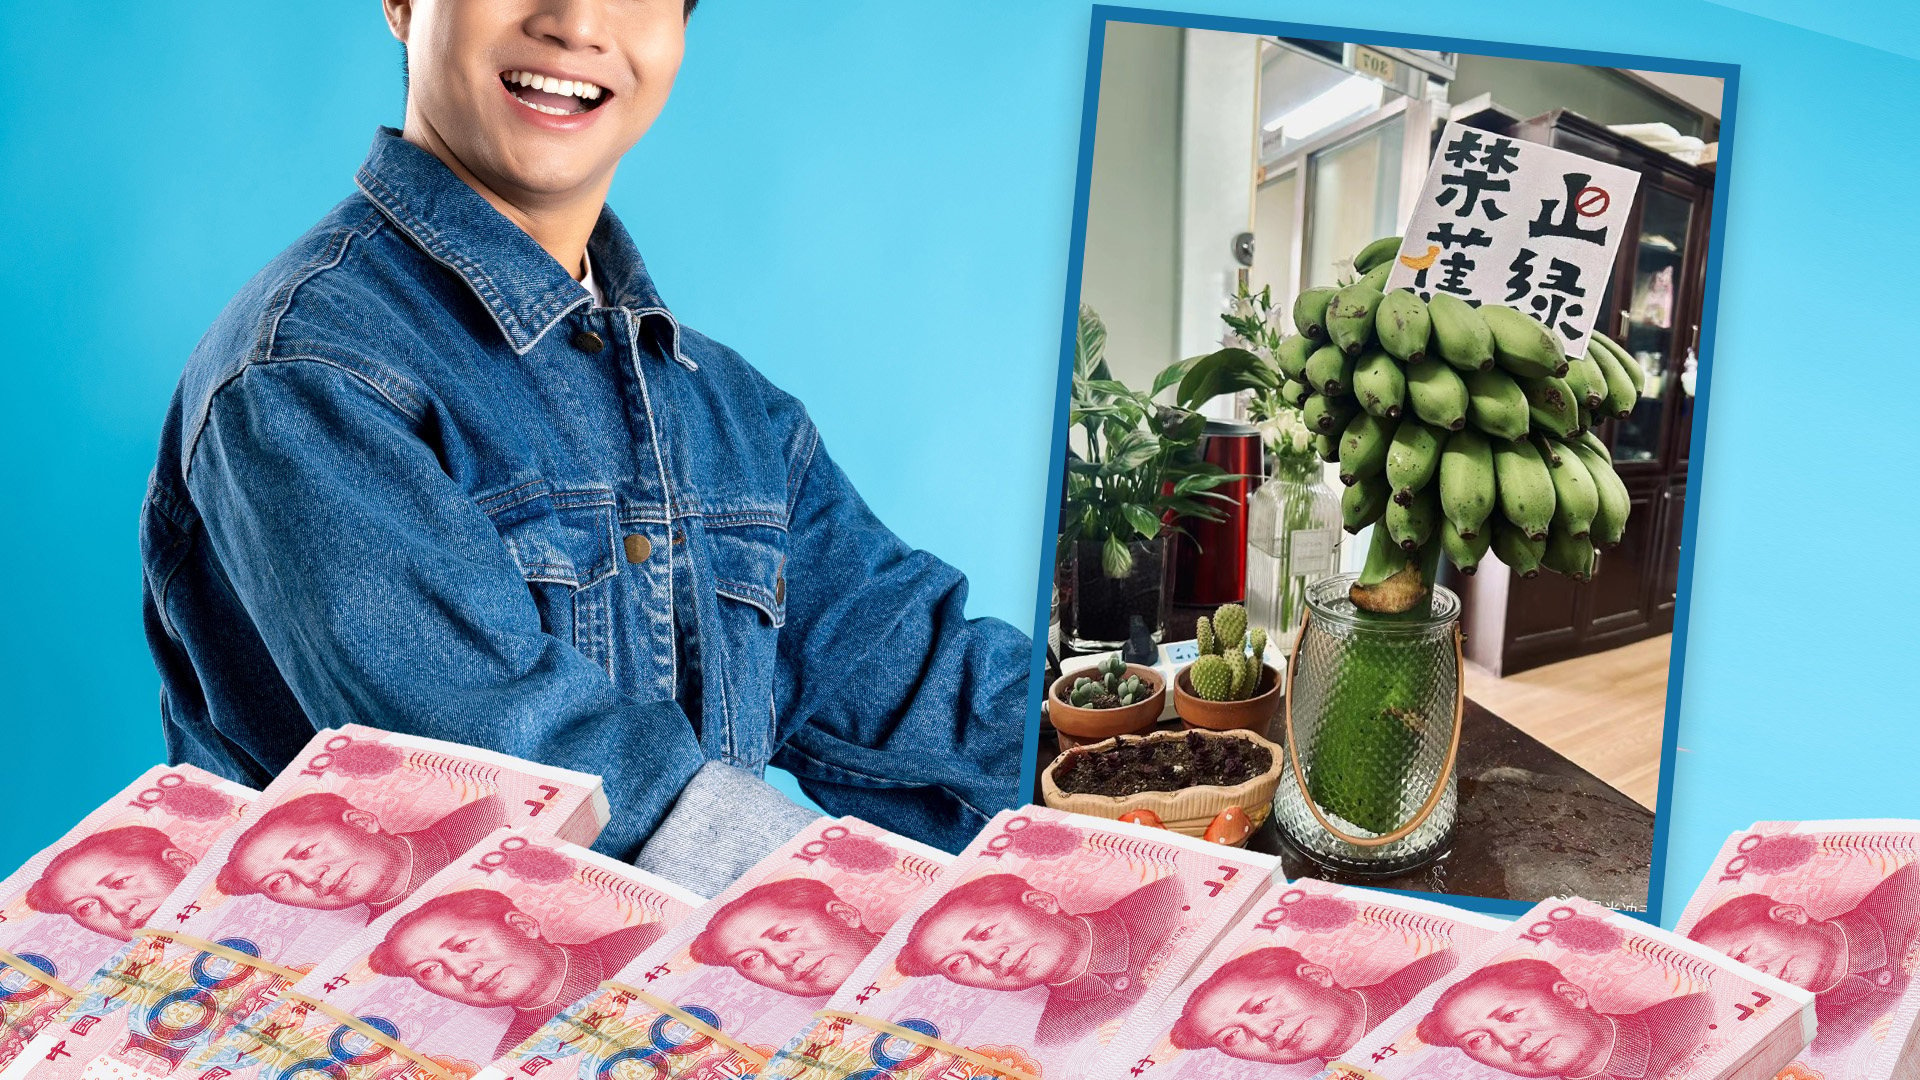 A burned-out worker in China gave up his job to make US$280,000 a month selling green bananas as fruit cultivation in offices for stress relief goes viral. Photo: SCMP composite/Shutterstock/Weibo